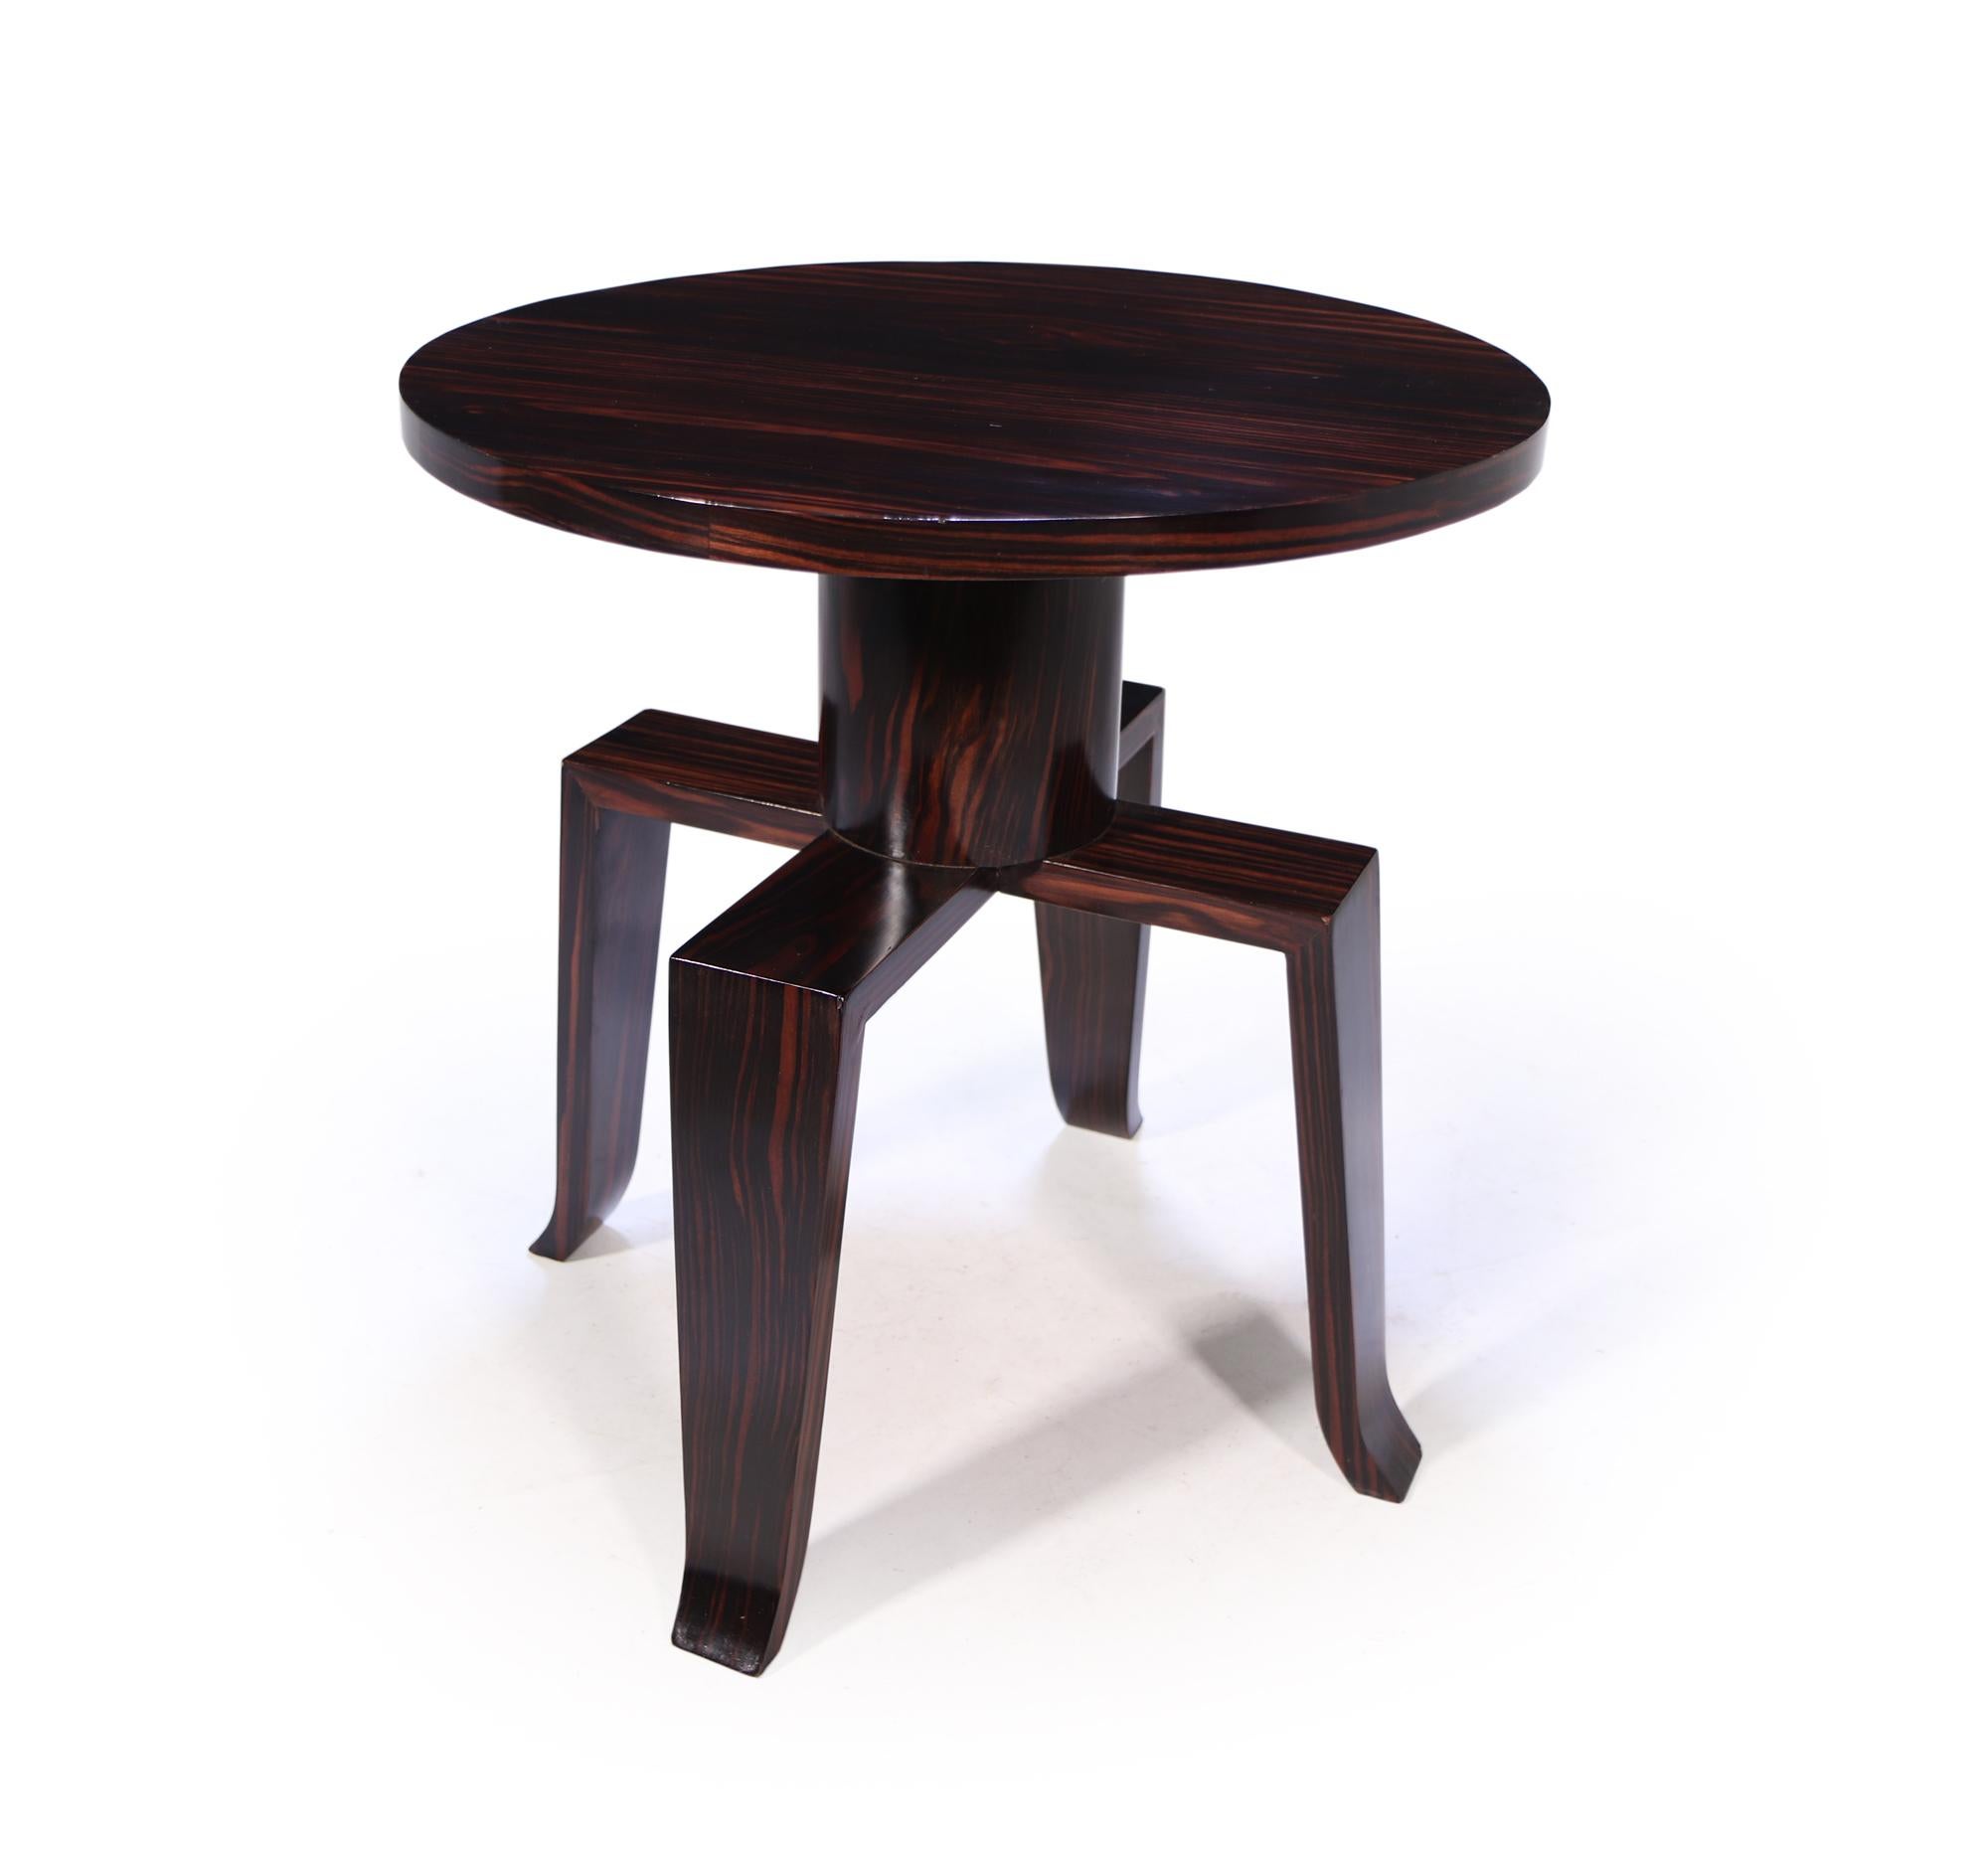 A very unusual piece of Art Deco having four legs splayed at the bottom, cone center column with a circular top all in macassar ebony with excellent grain and colour, the table has been restored where necessary and fully polished by hand

Age: